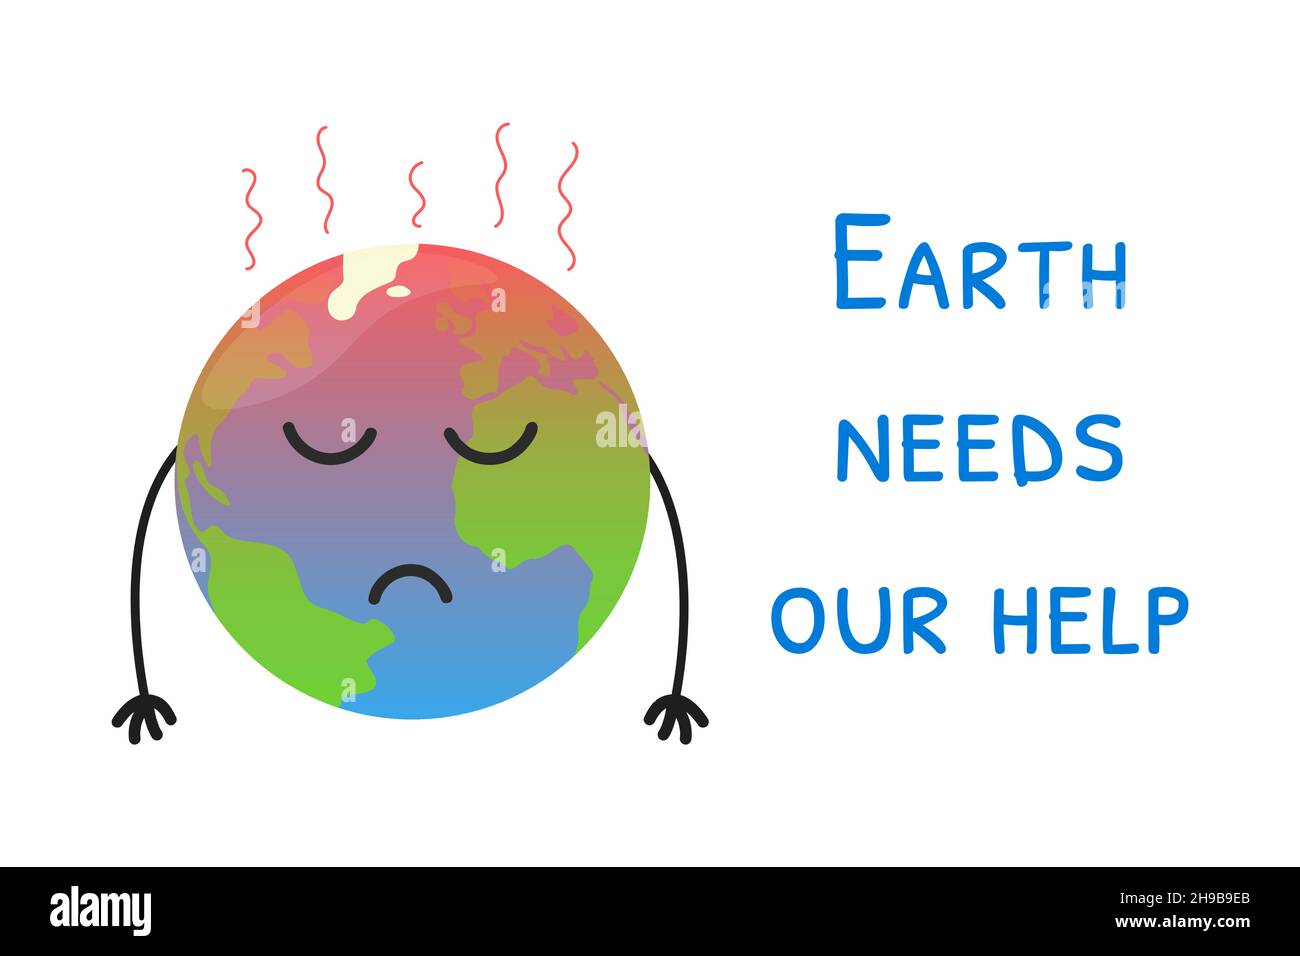 Hot cartoon Earth planet is sad with hands down. Text Earth needs help. Global warming concept. Environmental protection poster. Vector isolated illus Stock Vector